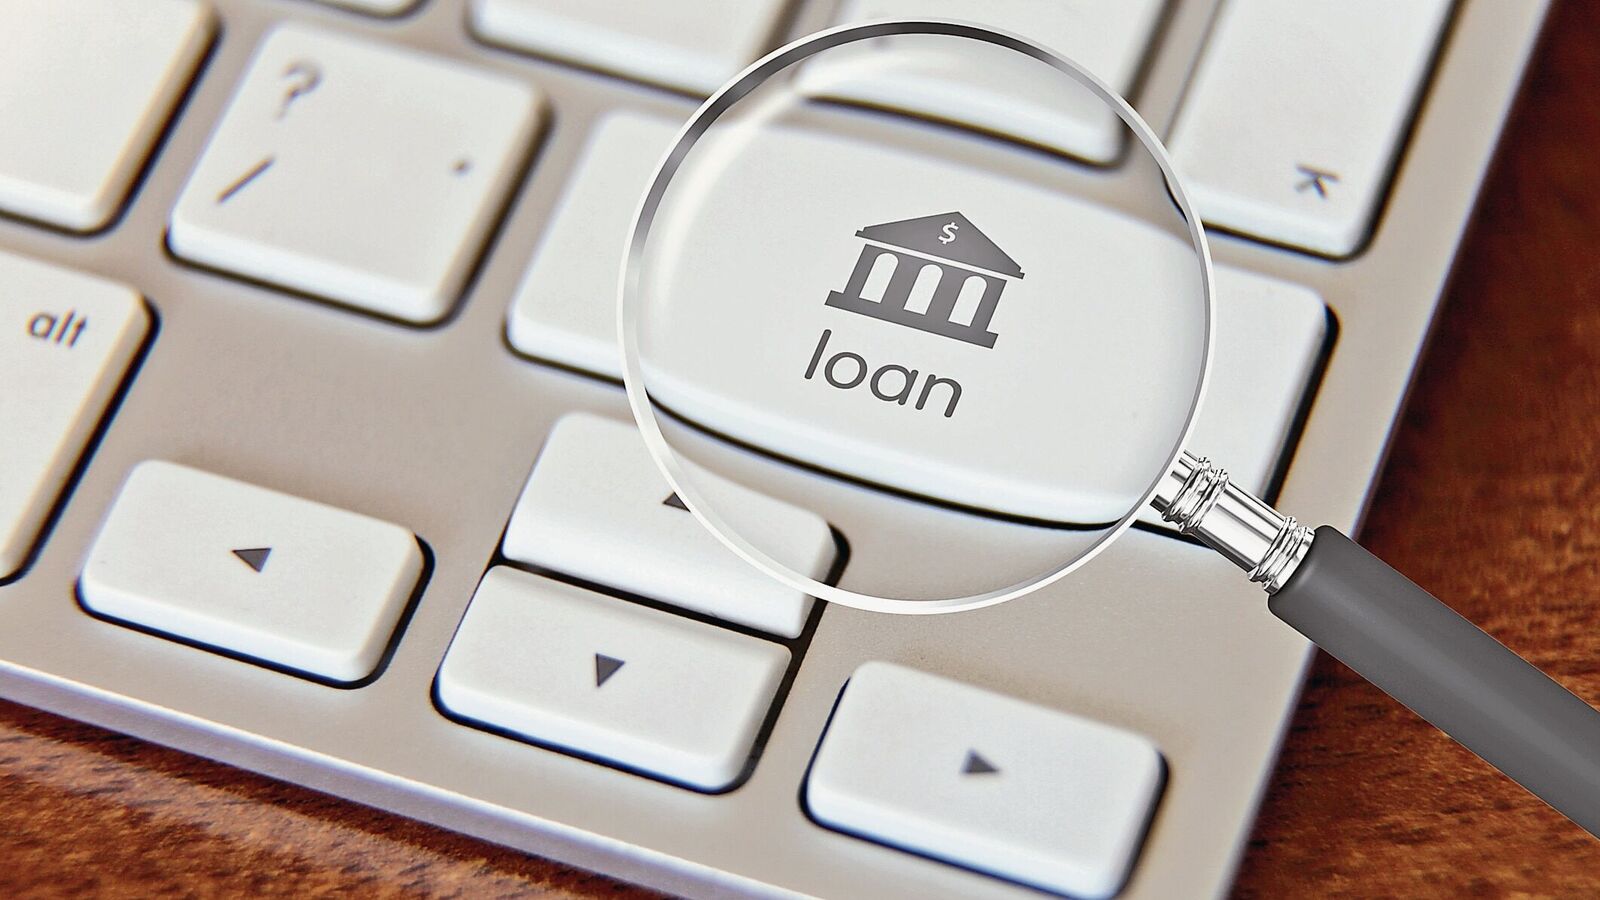 Considering a joint home loan? Here's how to apply